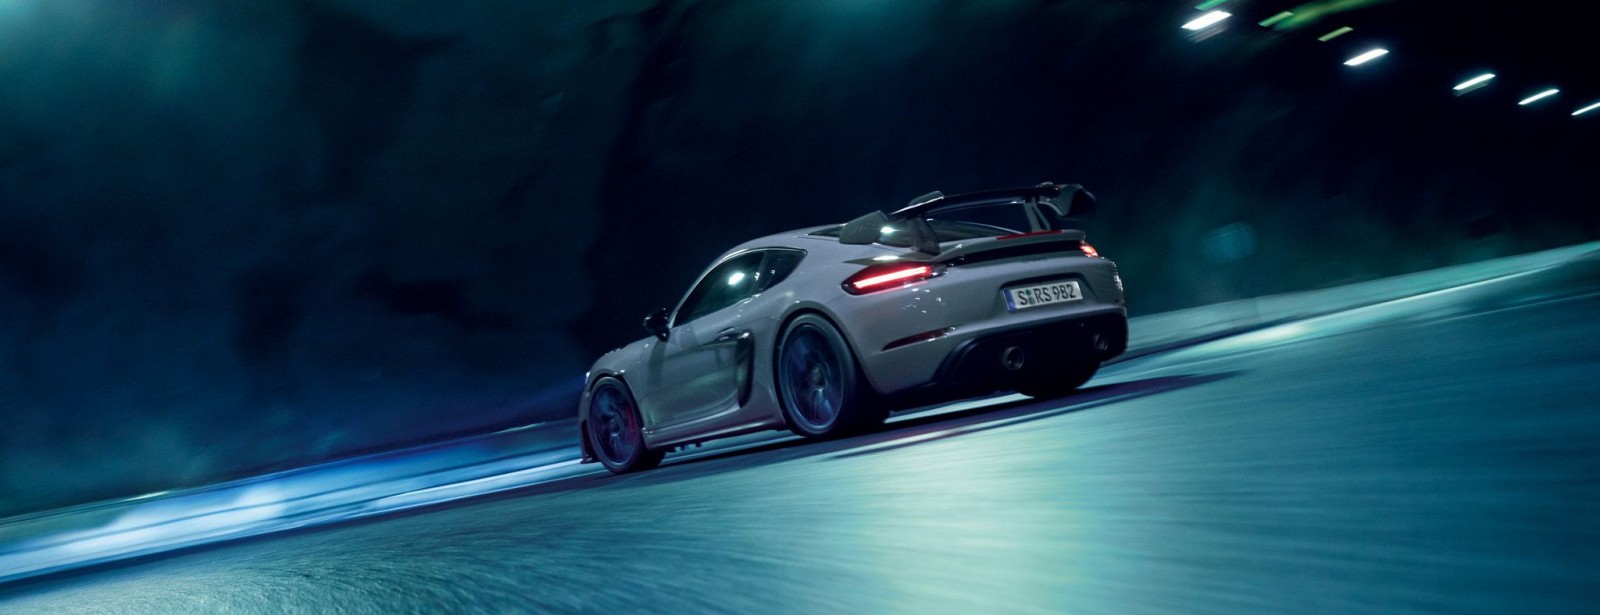 718 Cayman GT4 RS Driving Experience